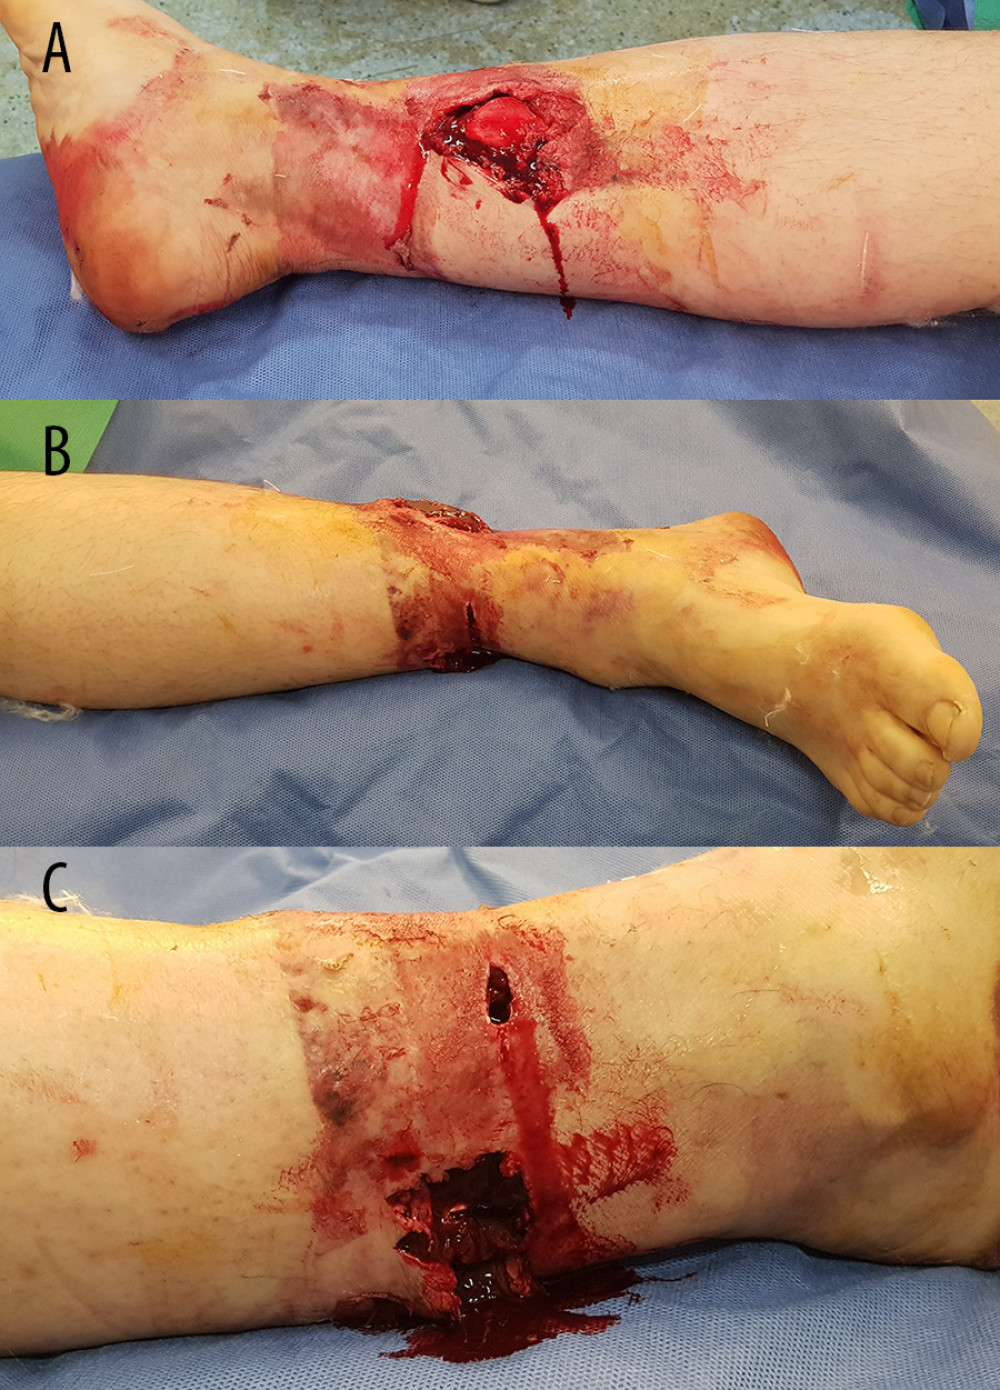 Images of the injured limb on admission. (A) The bone was exposed from the medial side, (B) Pale under the injury site and (C) Severe soft tissue injury of the lateral side.